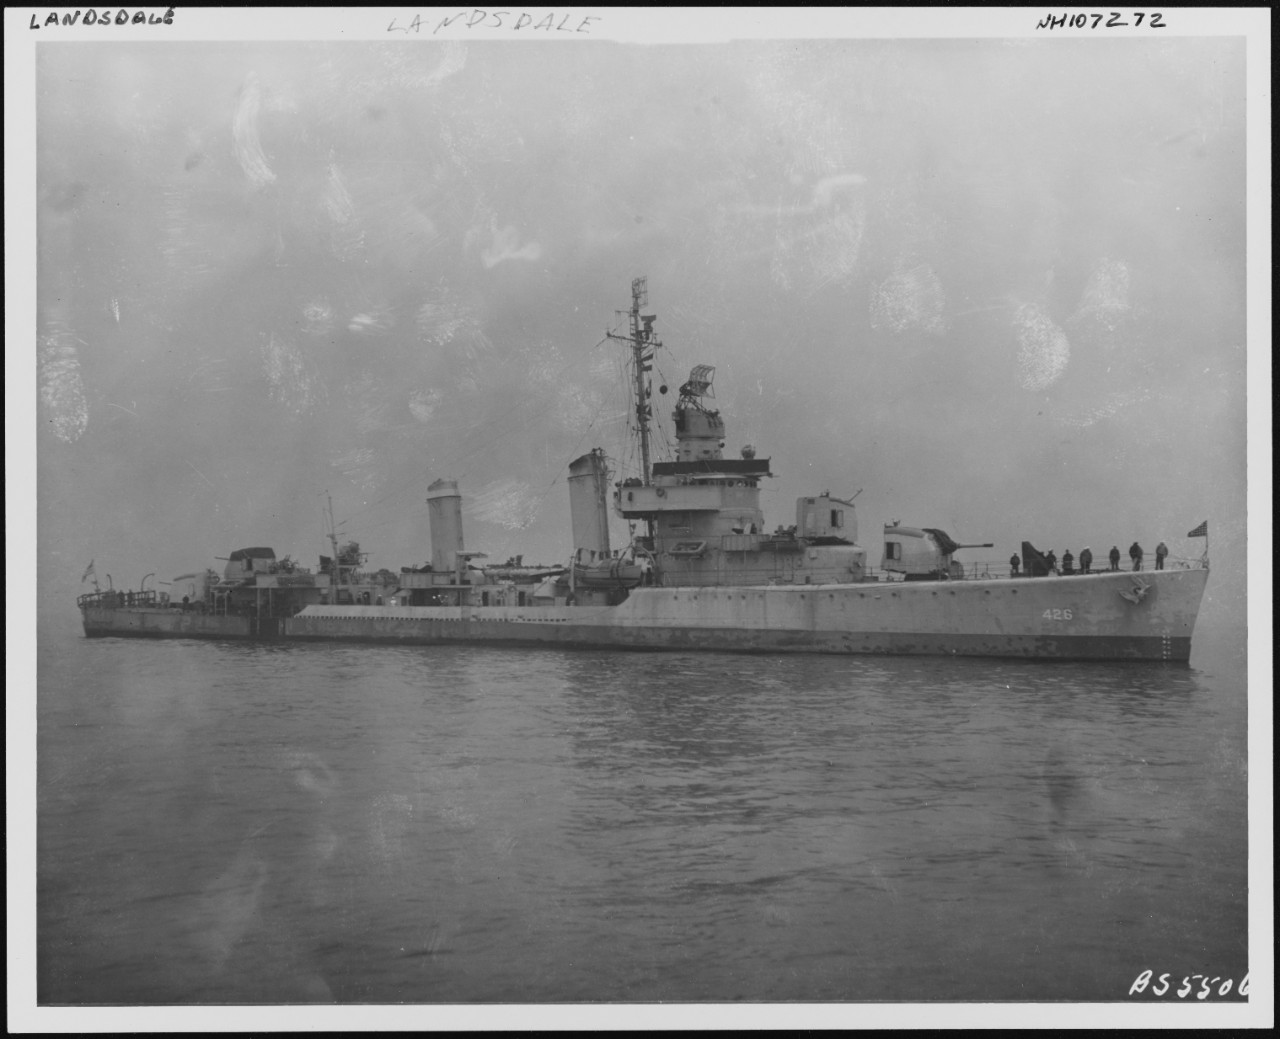 Photo #: NH 107272  USS Lansdale